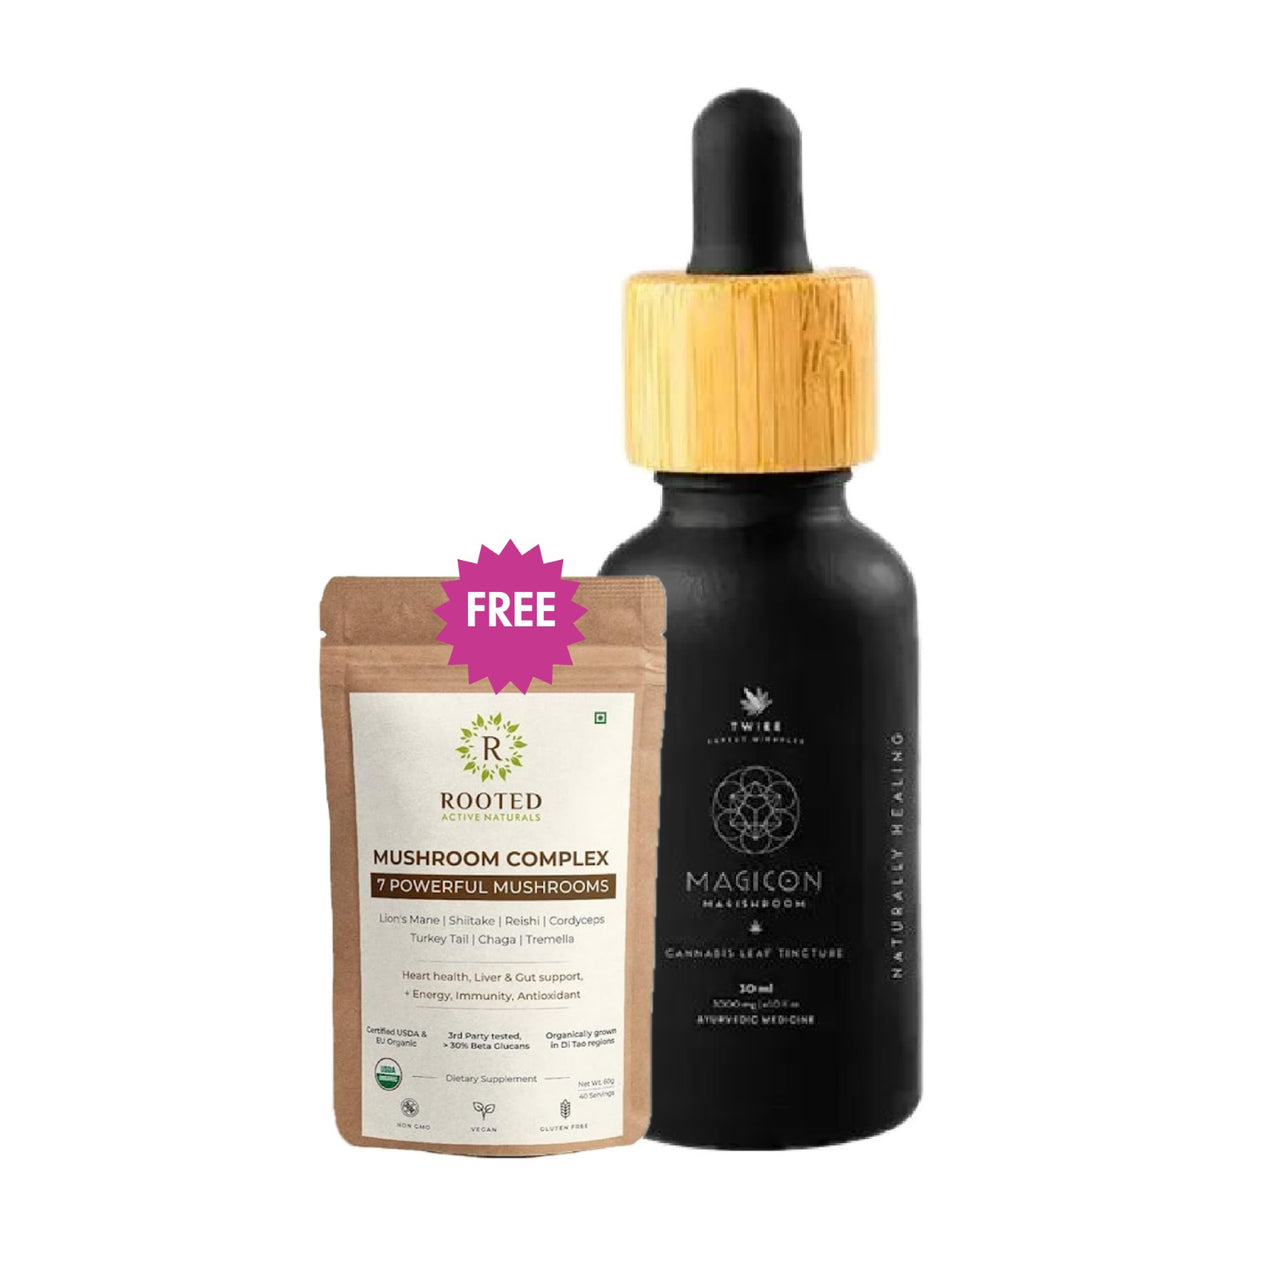 Free Rooted Actives 7 Mushrooms Complex extract powder with Twiee - Magicon Magishroom Cannabis Leaf Tincture